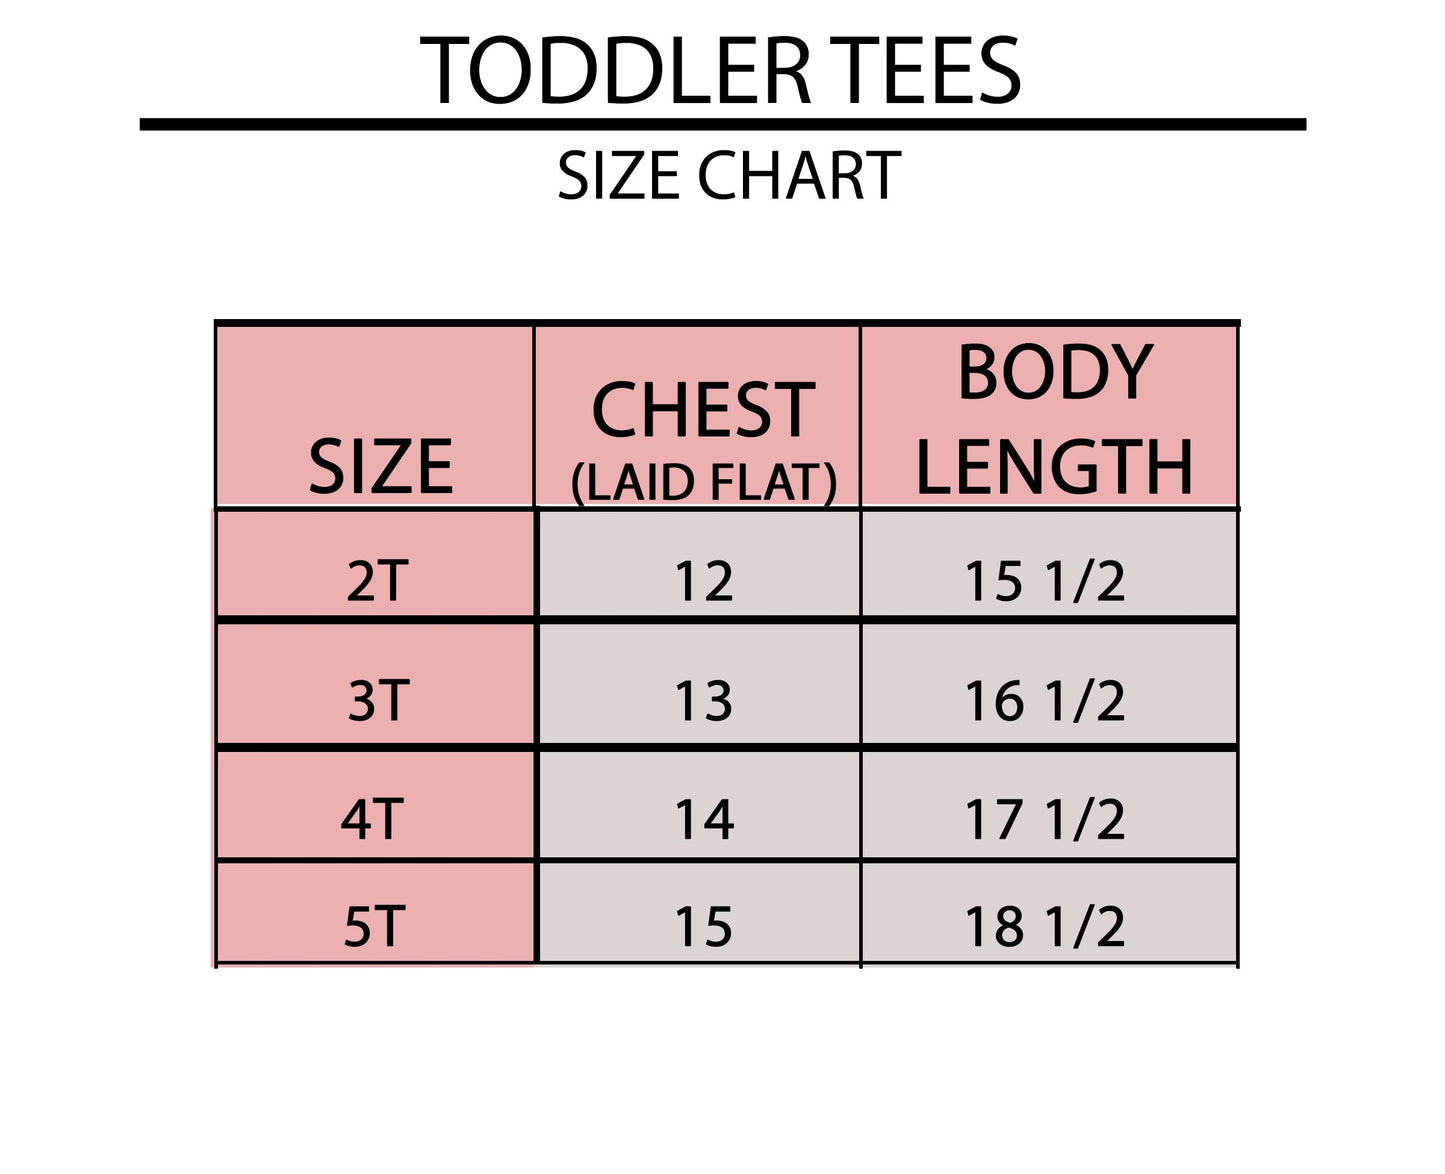 Tiny Witch Gang | Toddler Graphic Short Sleeve Tee